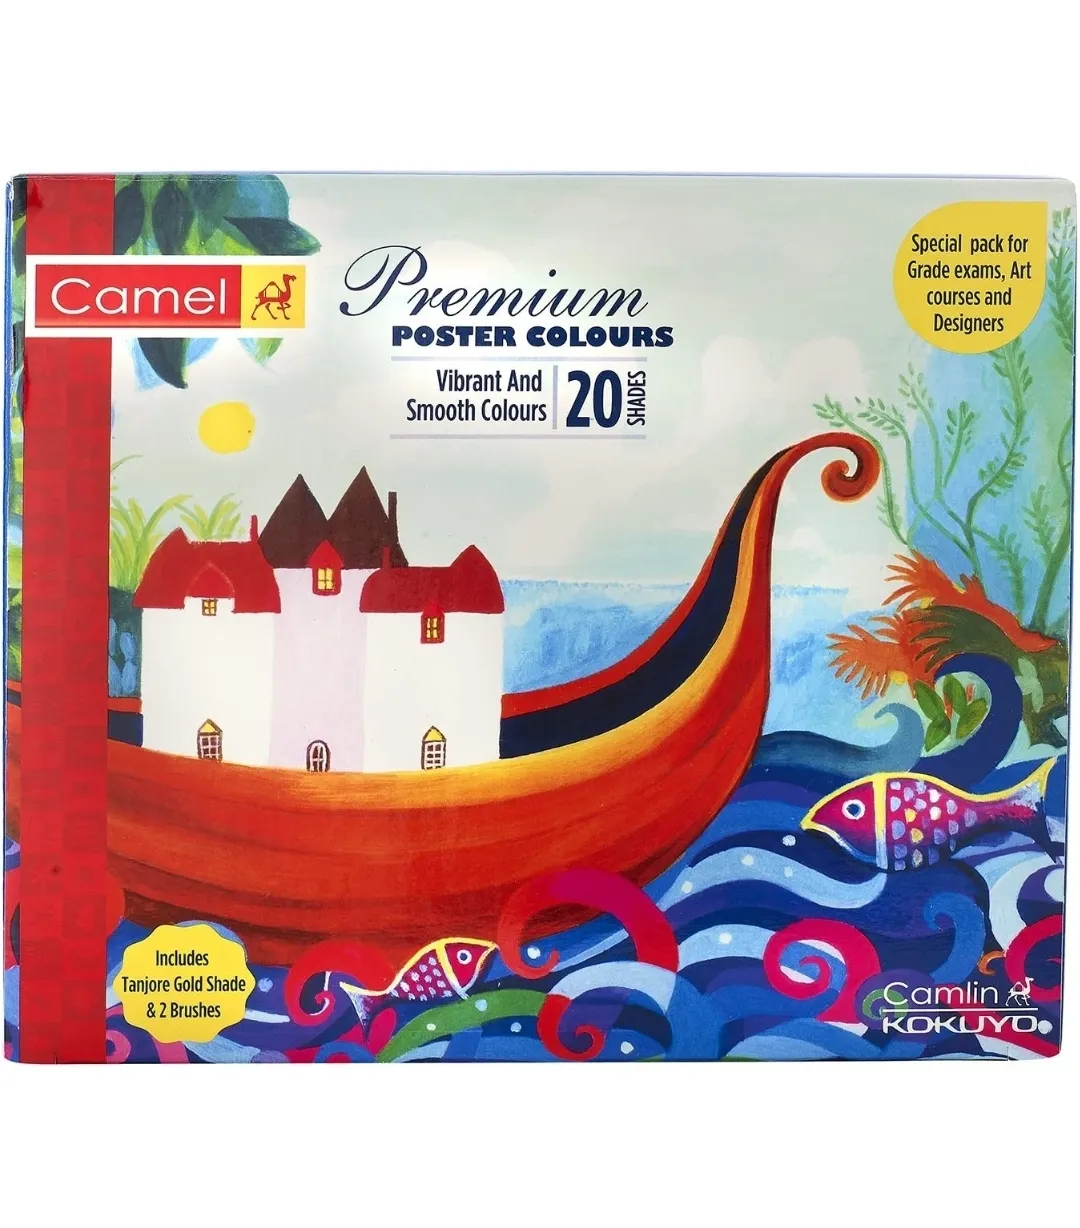 Camel, Camlin Premium Poster Colour with Brush - 20 Shades Pack of 1 Box (Multicolor)